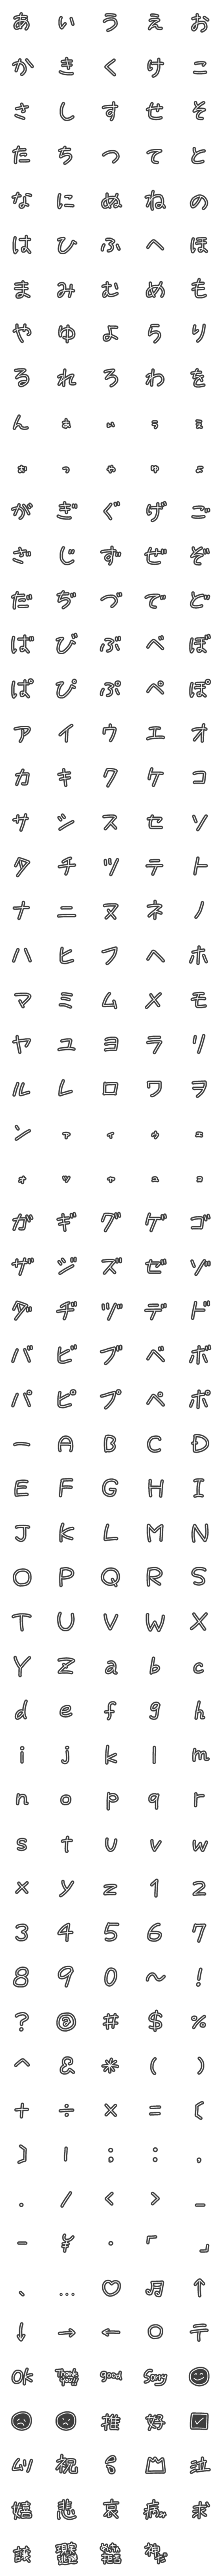 [LINE絵文字]ふちどり絵文字の画像一覧